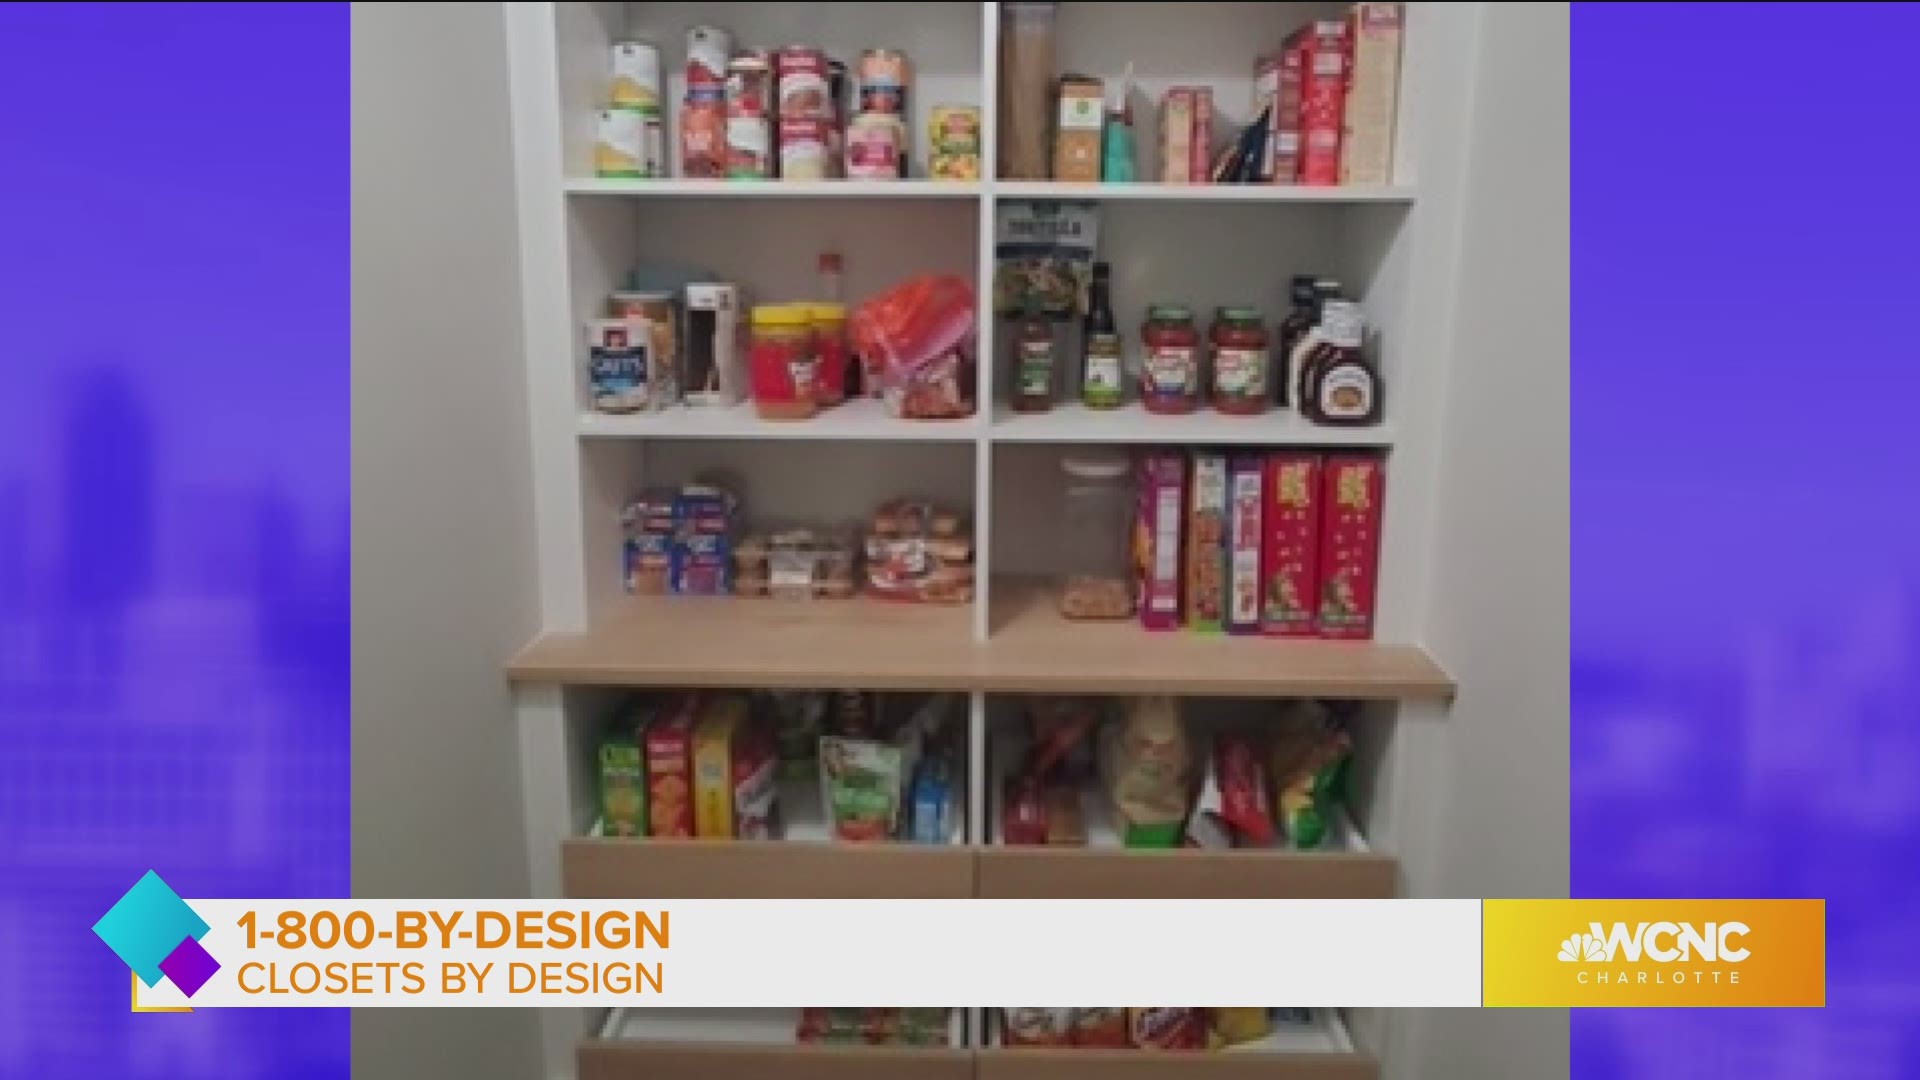 Get organized and build the pantry of your dreams with Closets by Design